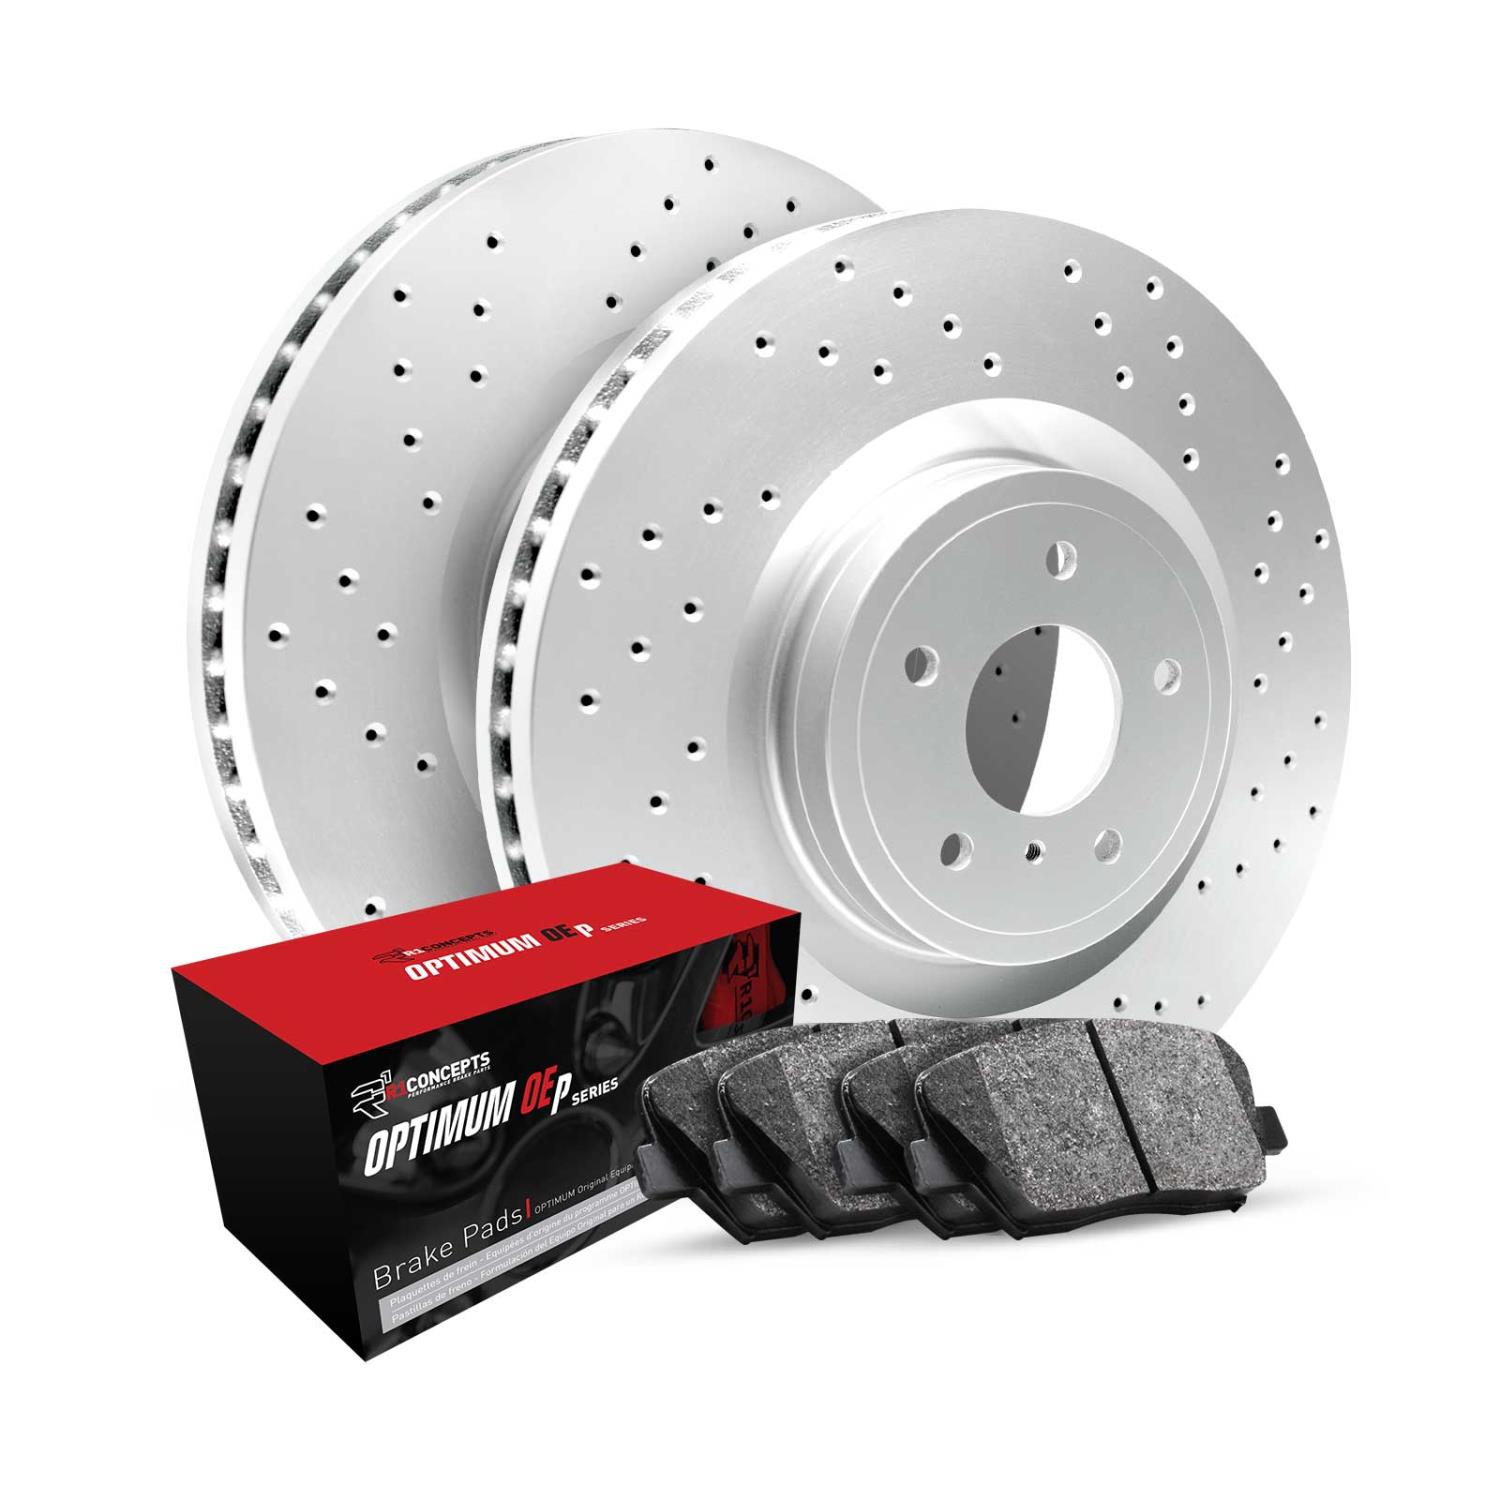 GEO-Carbon Drilled Brake Rotor Set w/Optimum OE Pads, 2014-2020 Fits Multiple Makes/Models, Position: Rear